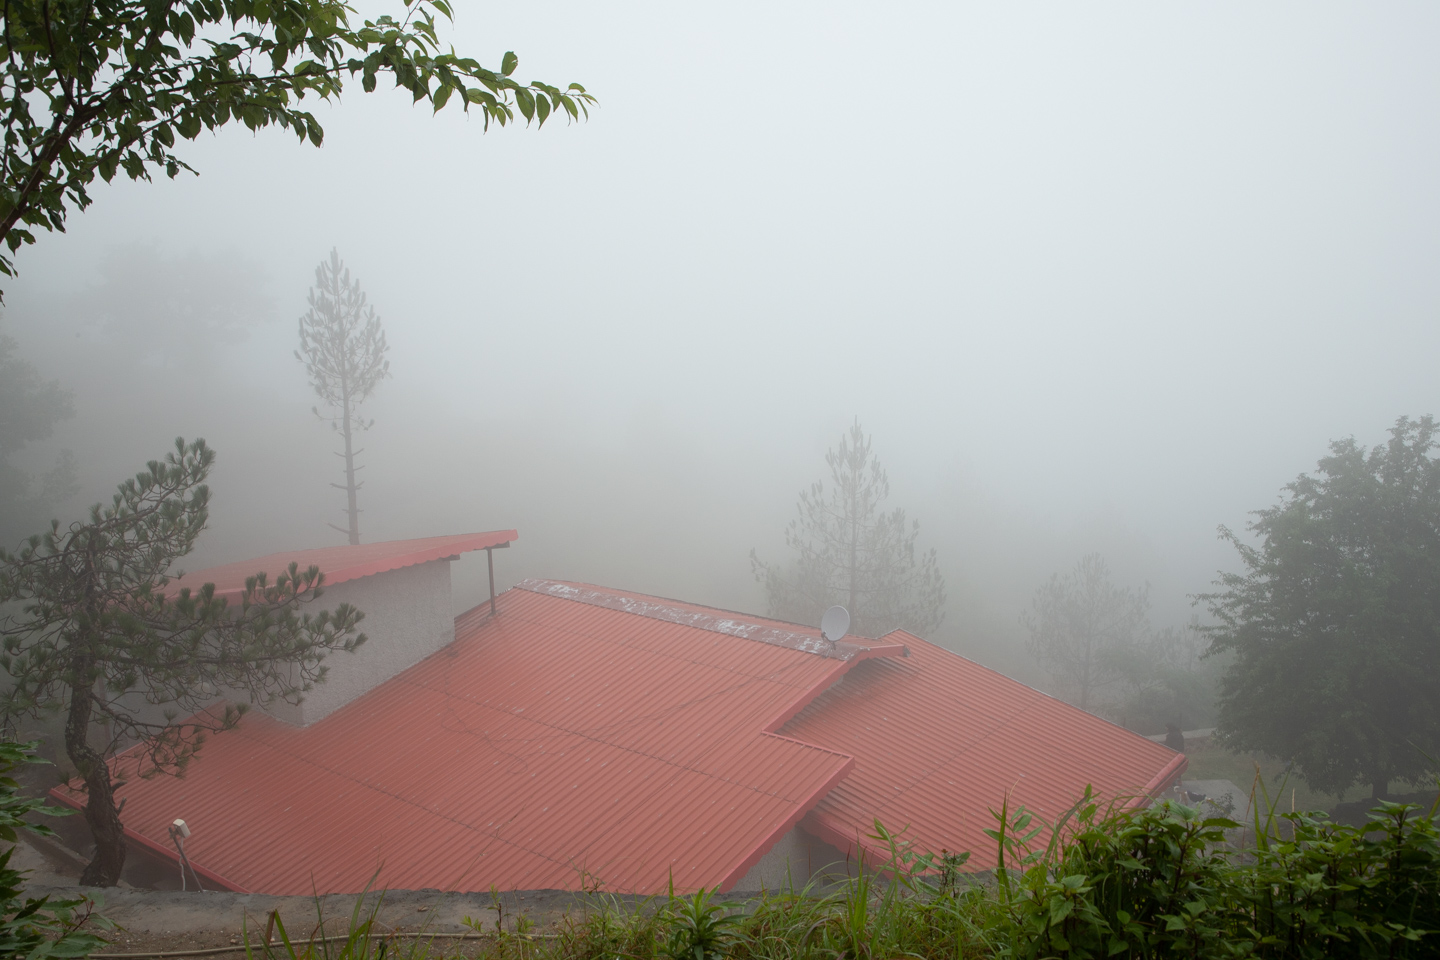 The house seen from above in the fog